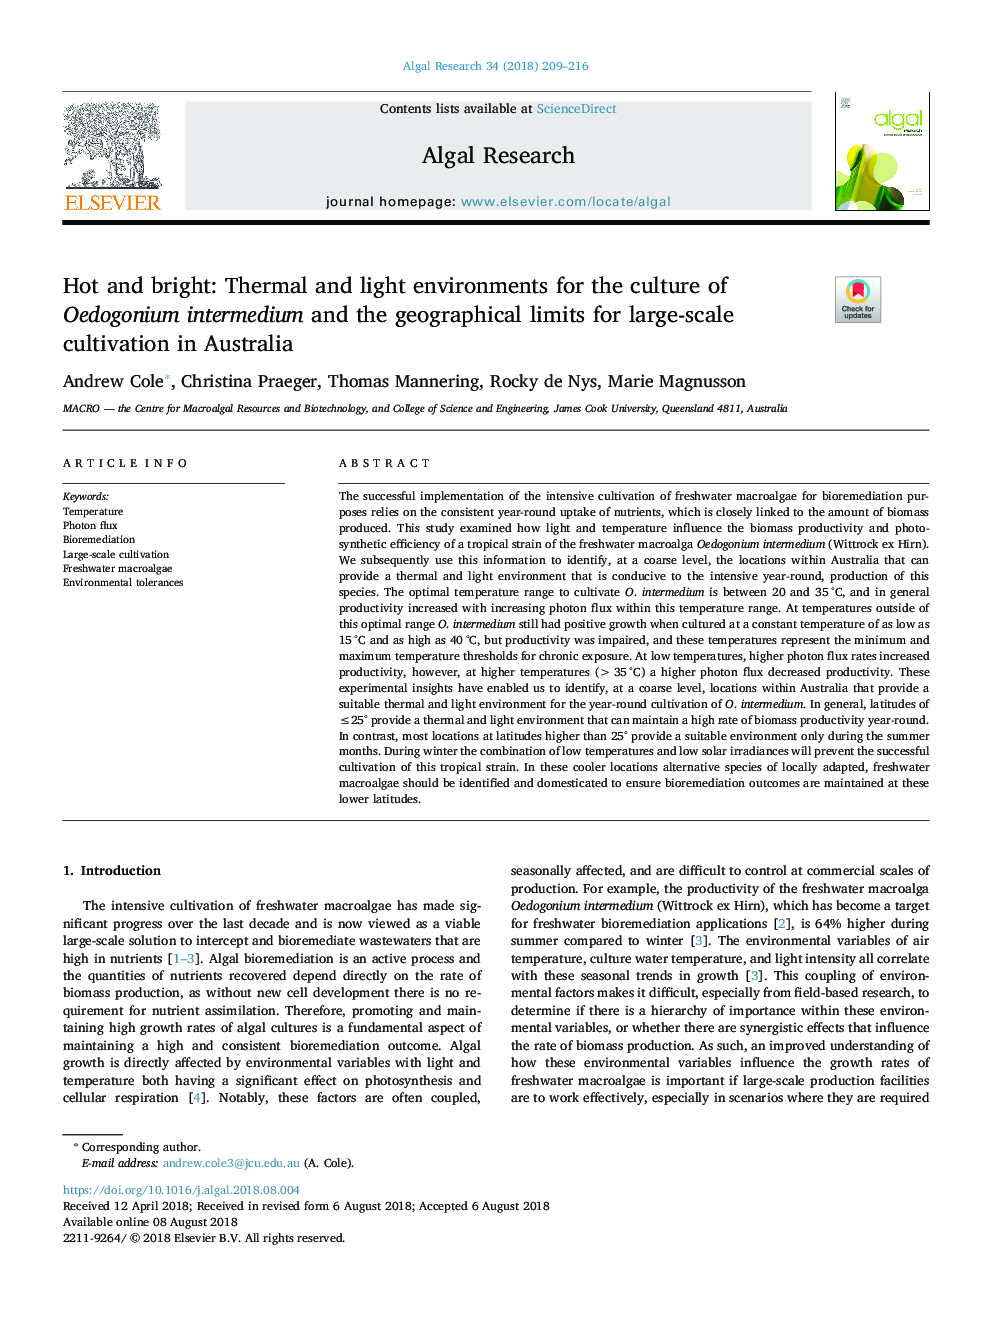 Hot and bright: Thermal and light environments for the culture of Oedogonium intermedium and the geographical limits for large-scale cultivation in Australia